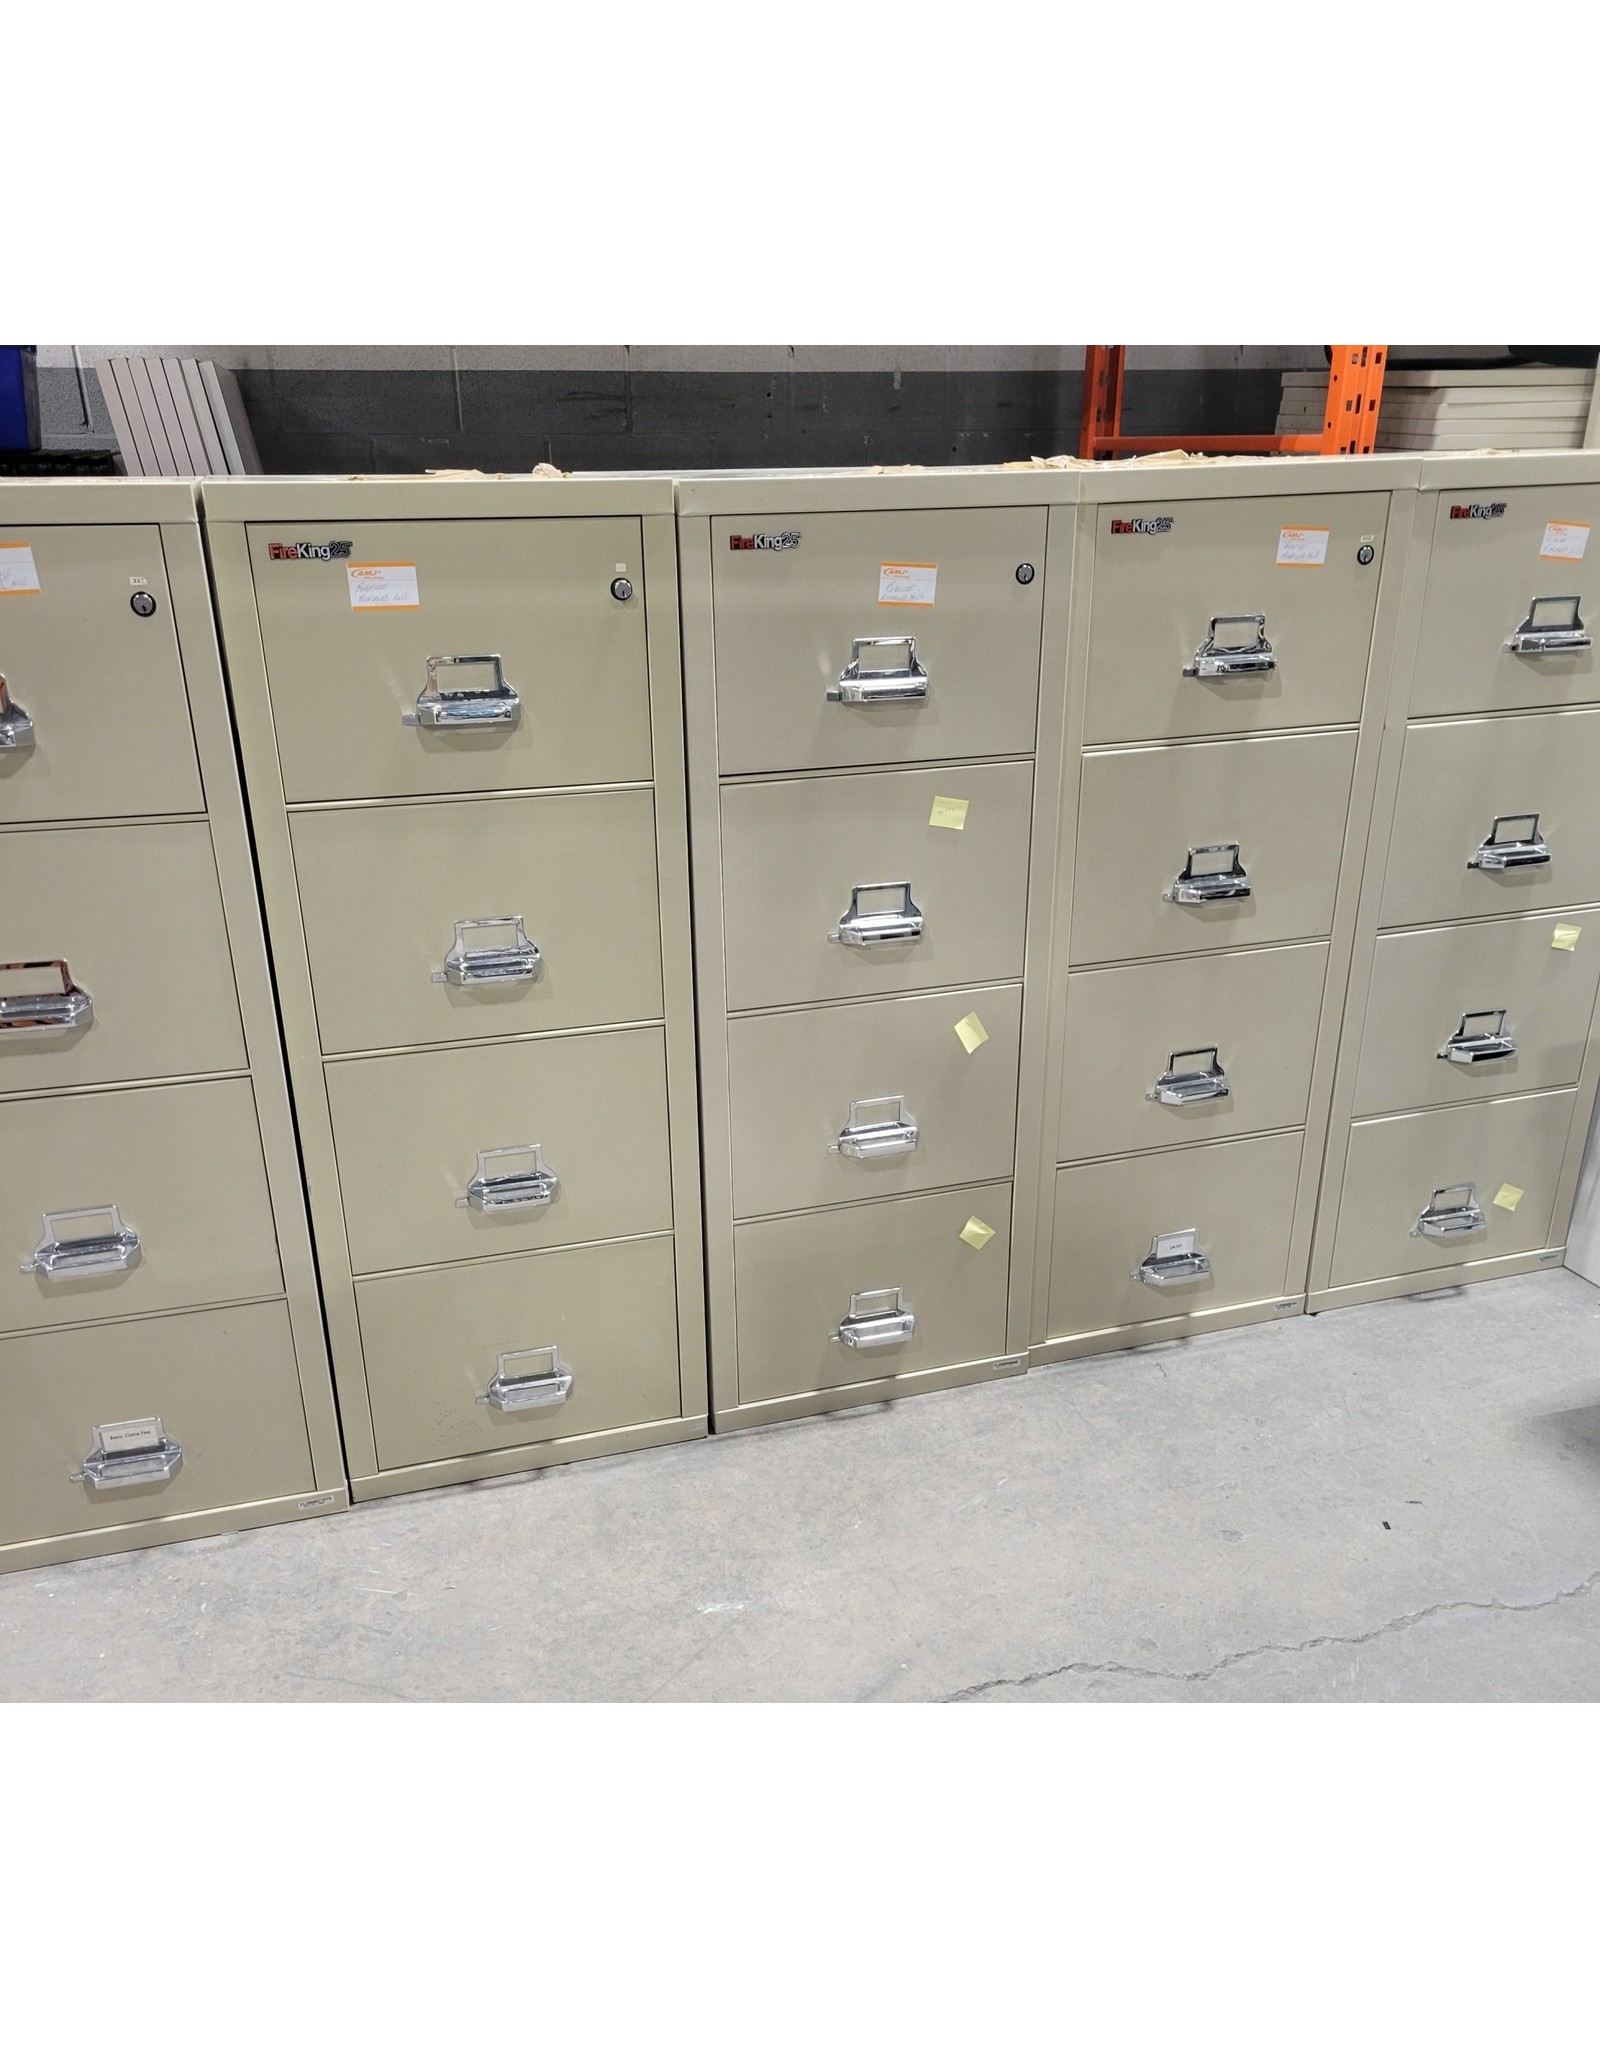 Fire Resistant 4dr Vertical Filing Cabinets